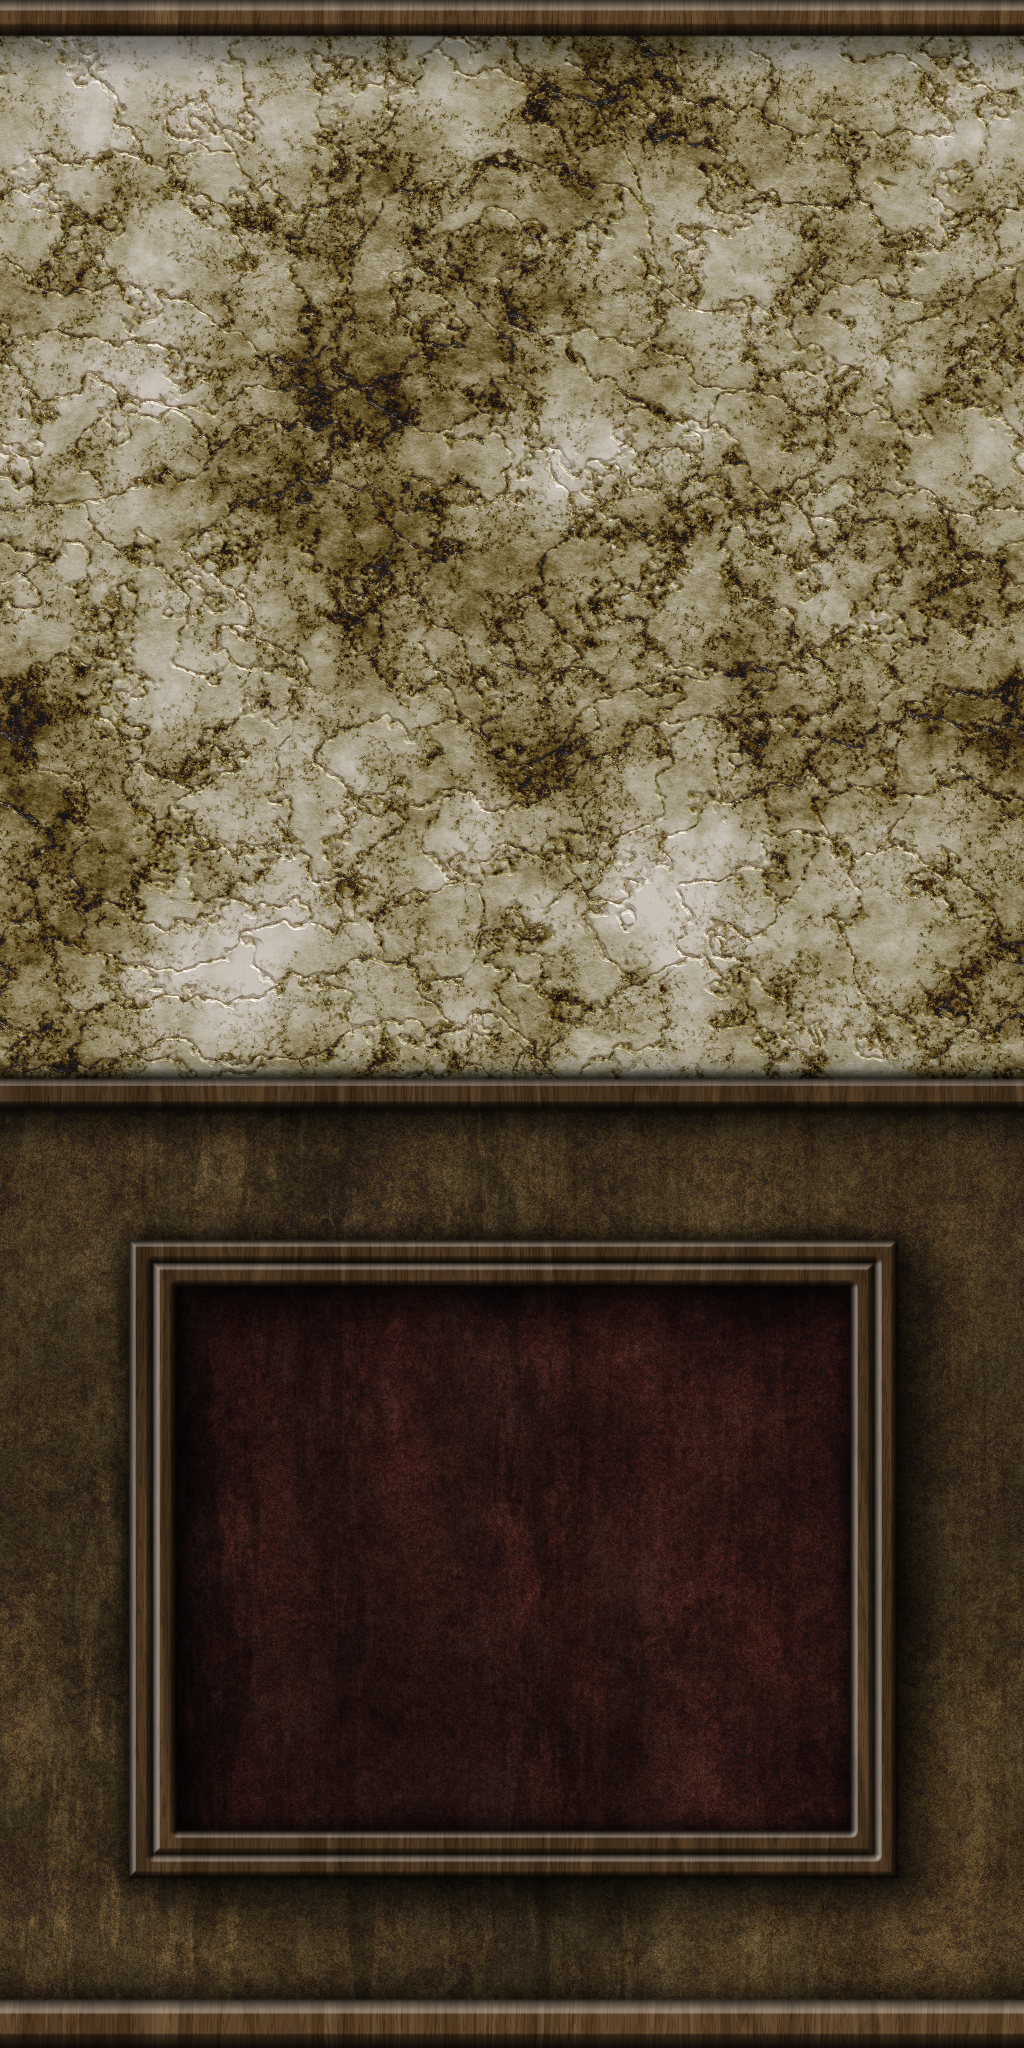 panel_and_plaster_wall_01_by_hoover1979-dbm3pqb.png